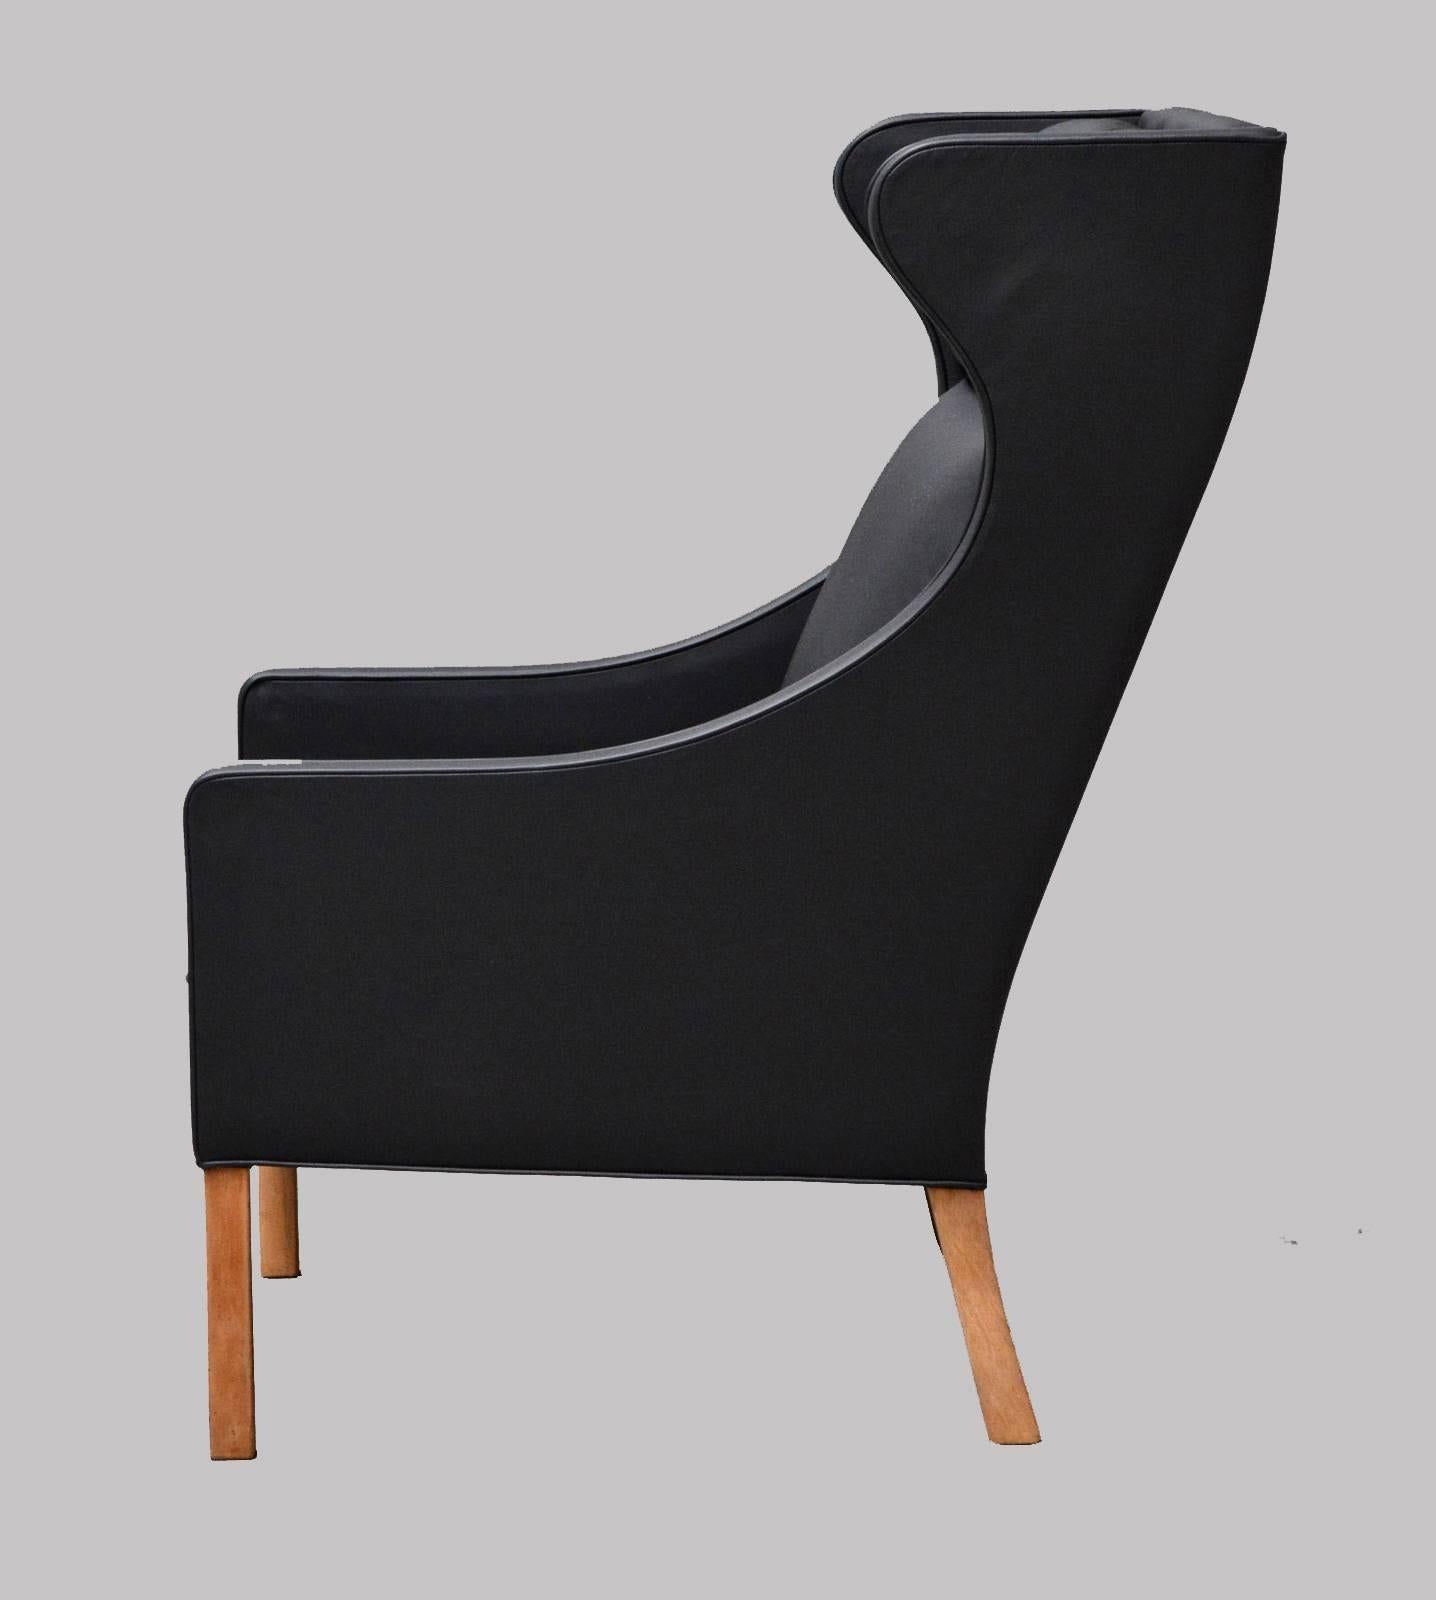 This model 2204 wingback easy chair was designed by Børge Mogensen in 1963 and produced by Fredericia Stolefabrik in Denmark during the late 1960s. The chair is in very good original condition apart from the head support pillow that has been covered